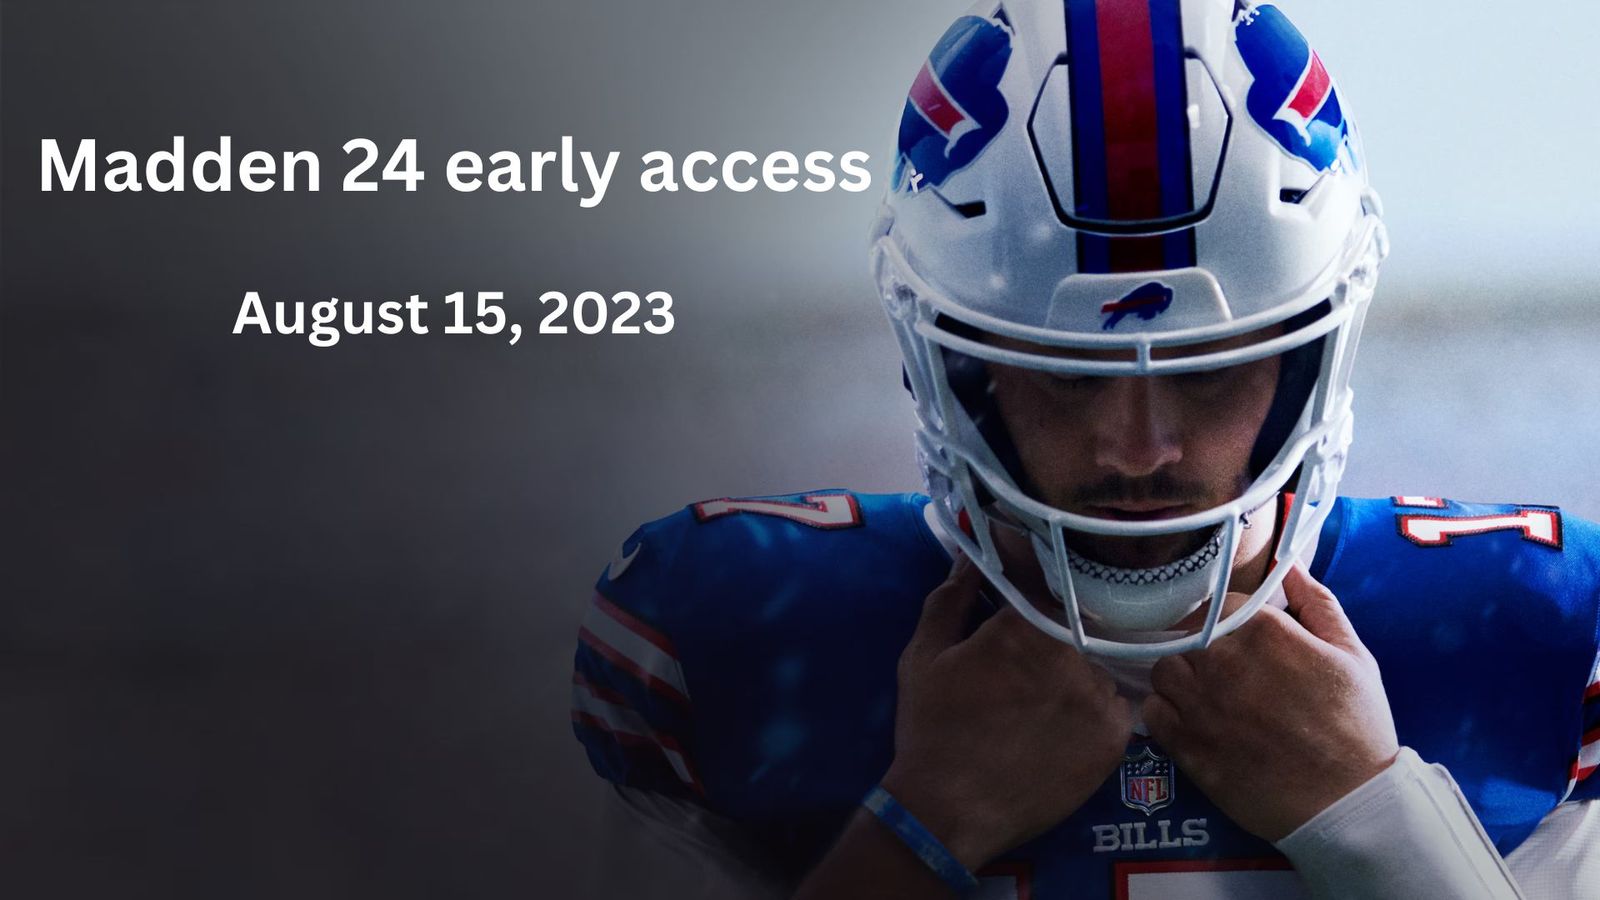 madden 24 early access countdown - august 15 2023